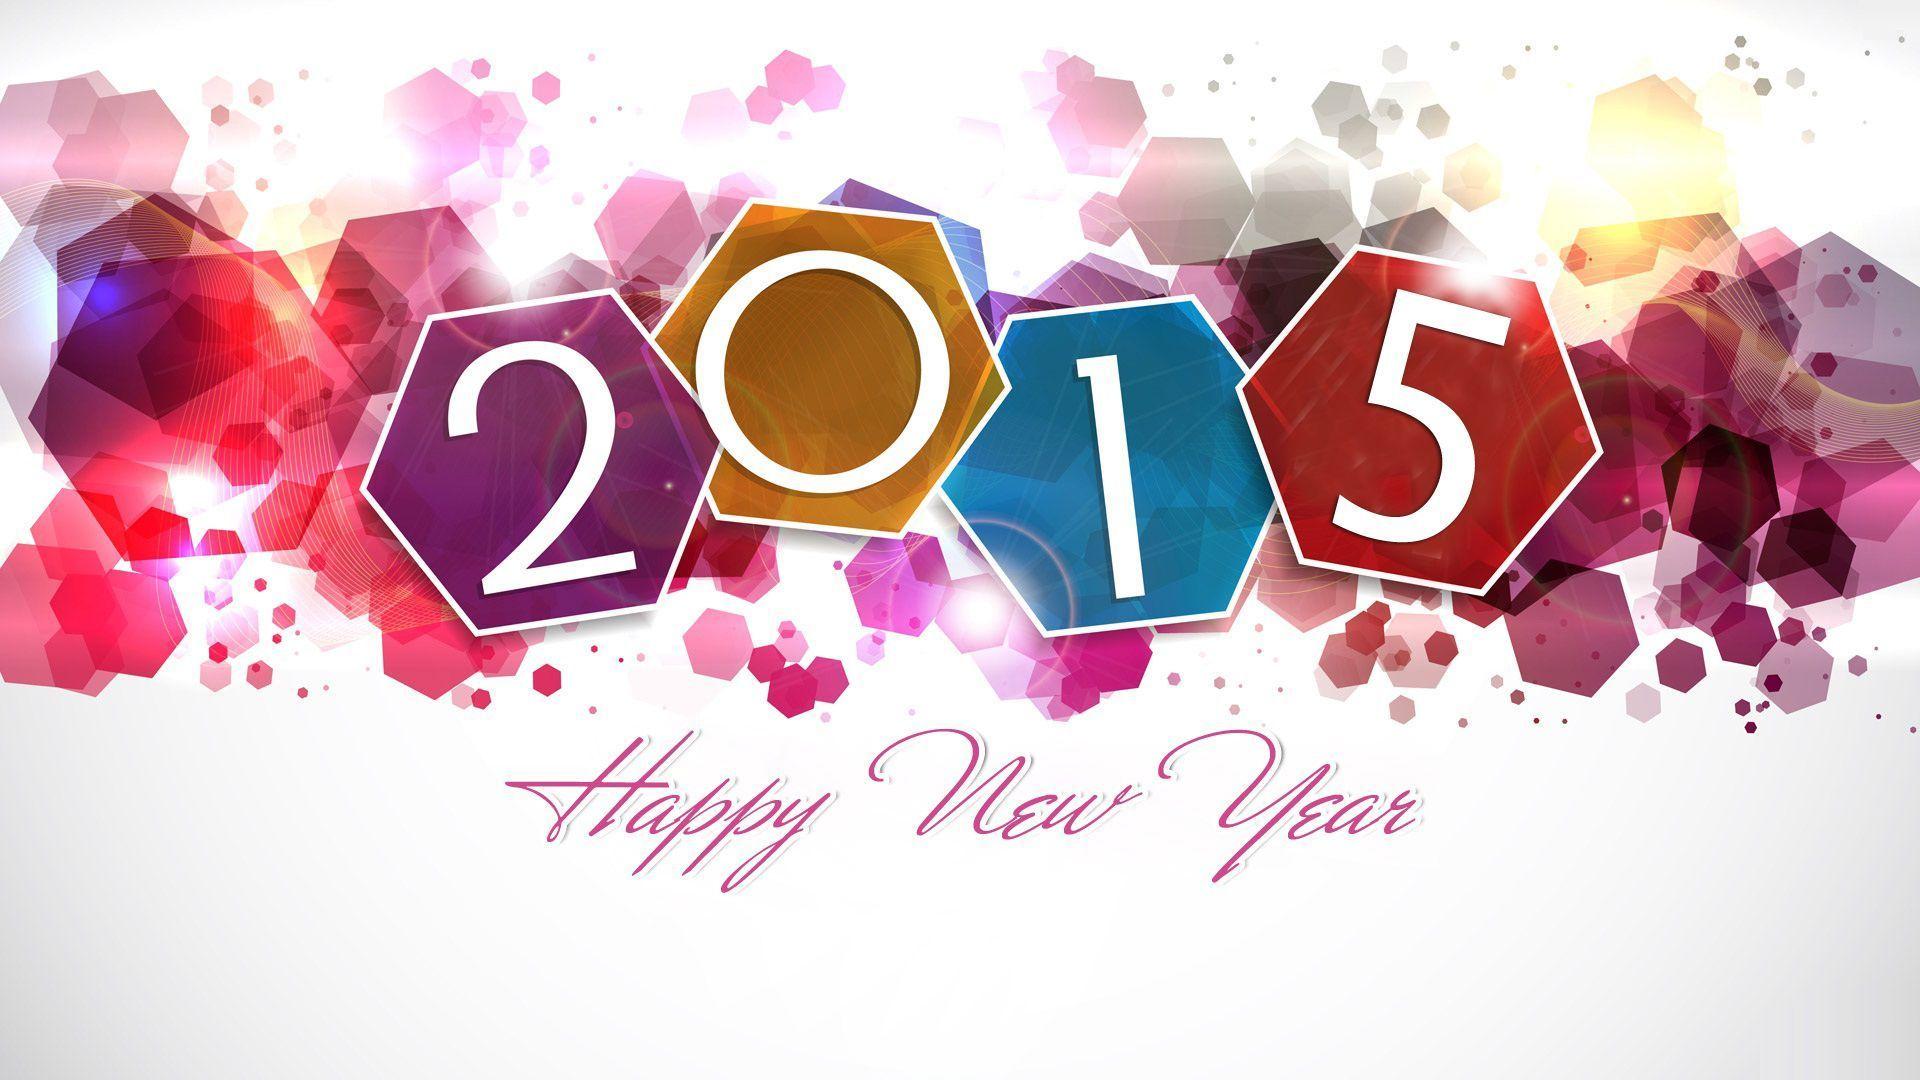 Happy New Year 2015 Picture, Image, Wallpaper, Photo, Graphics